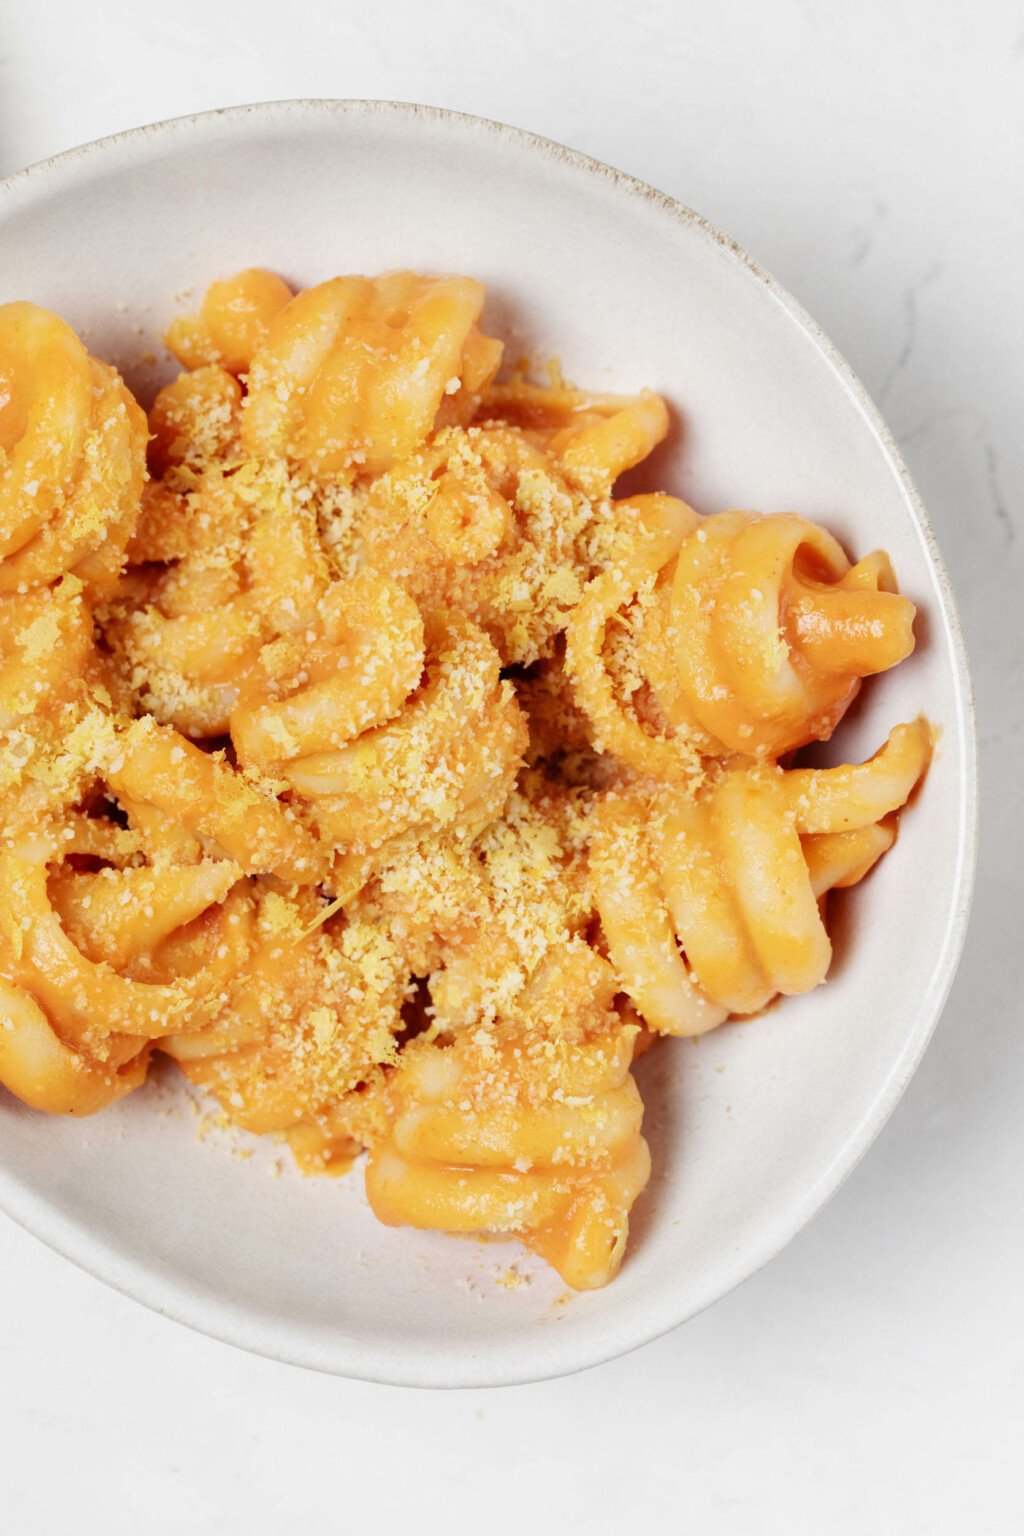 An overhead image of a bowl of creamy plant-based pumpkin pasta. The pasta is topped with a homemade cashew "parmesan" cheese. The bowl rests on a white surface.